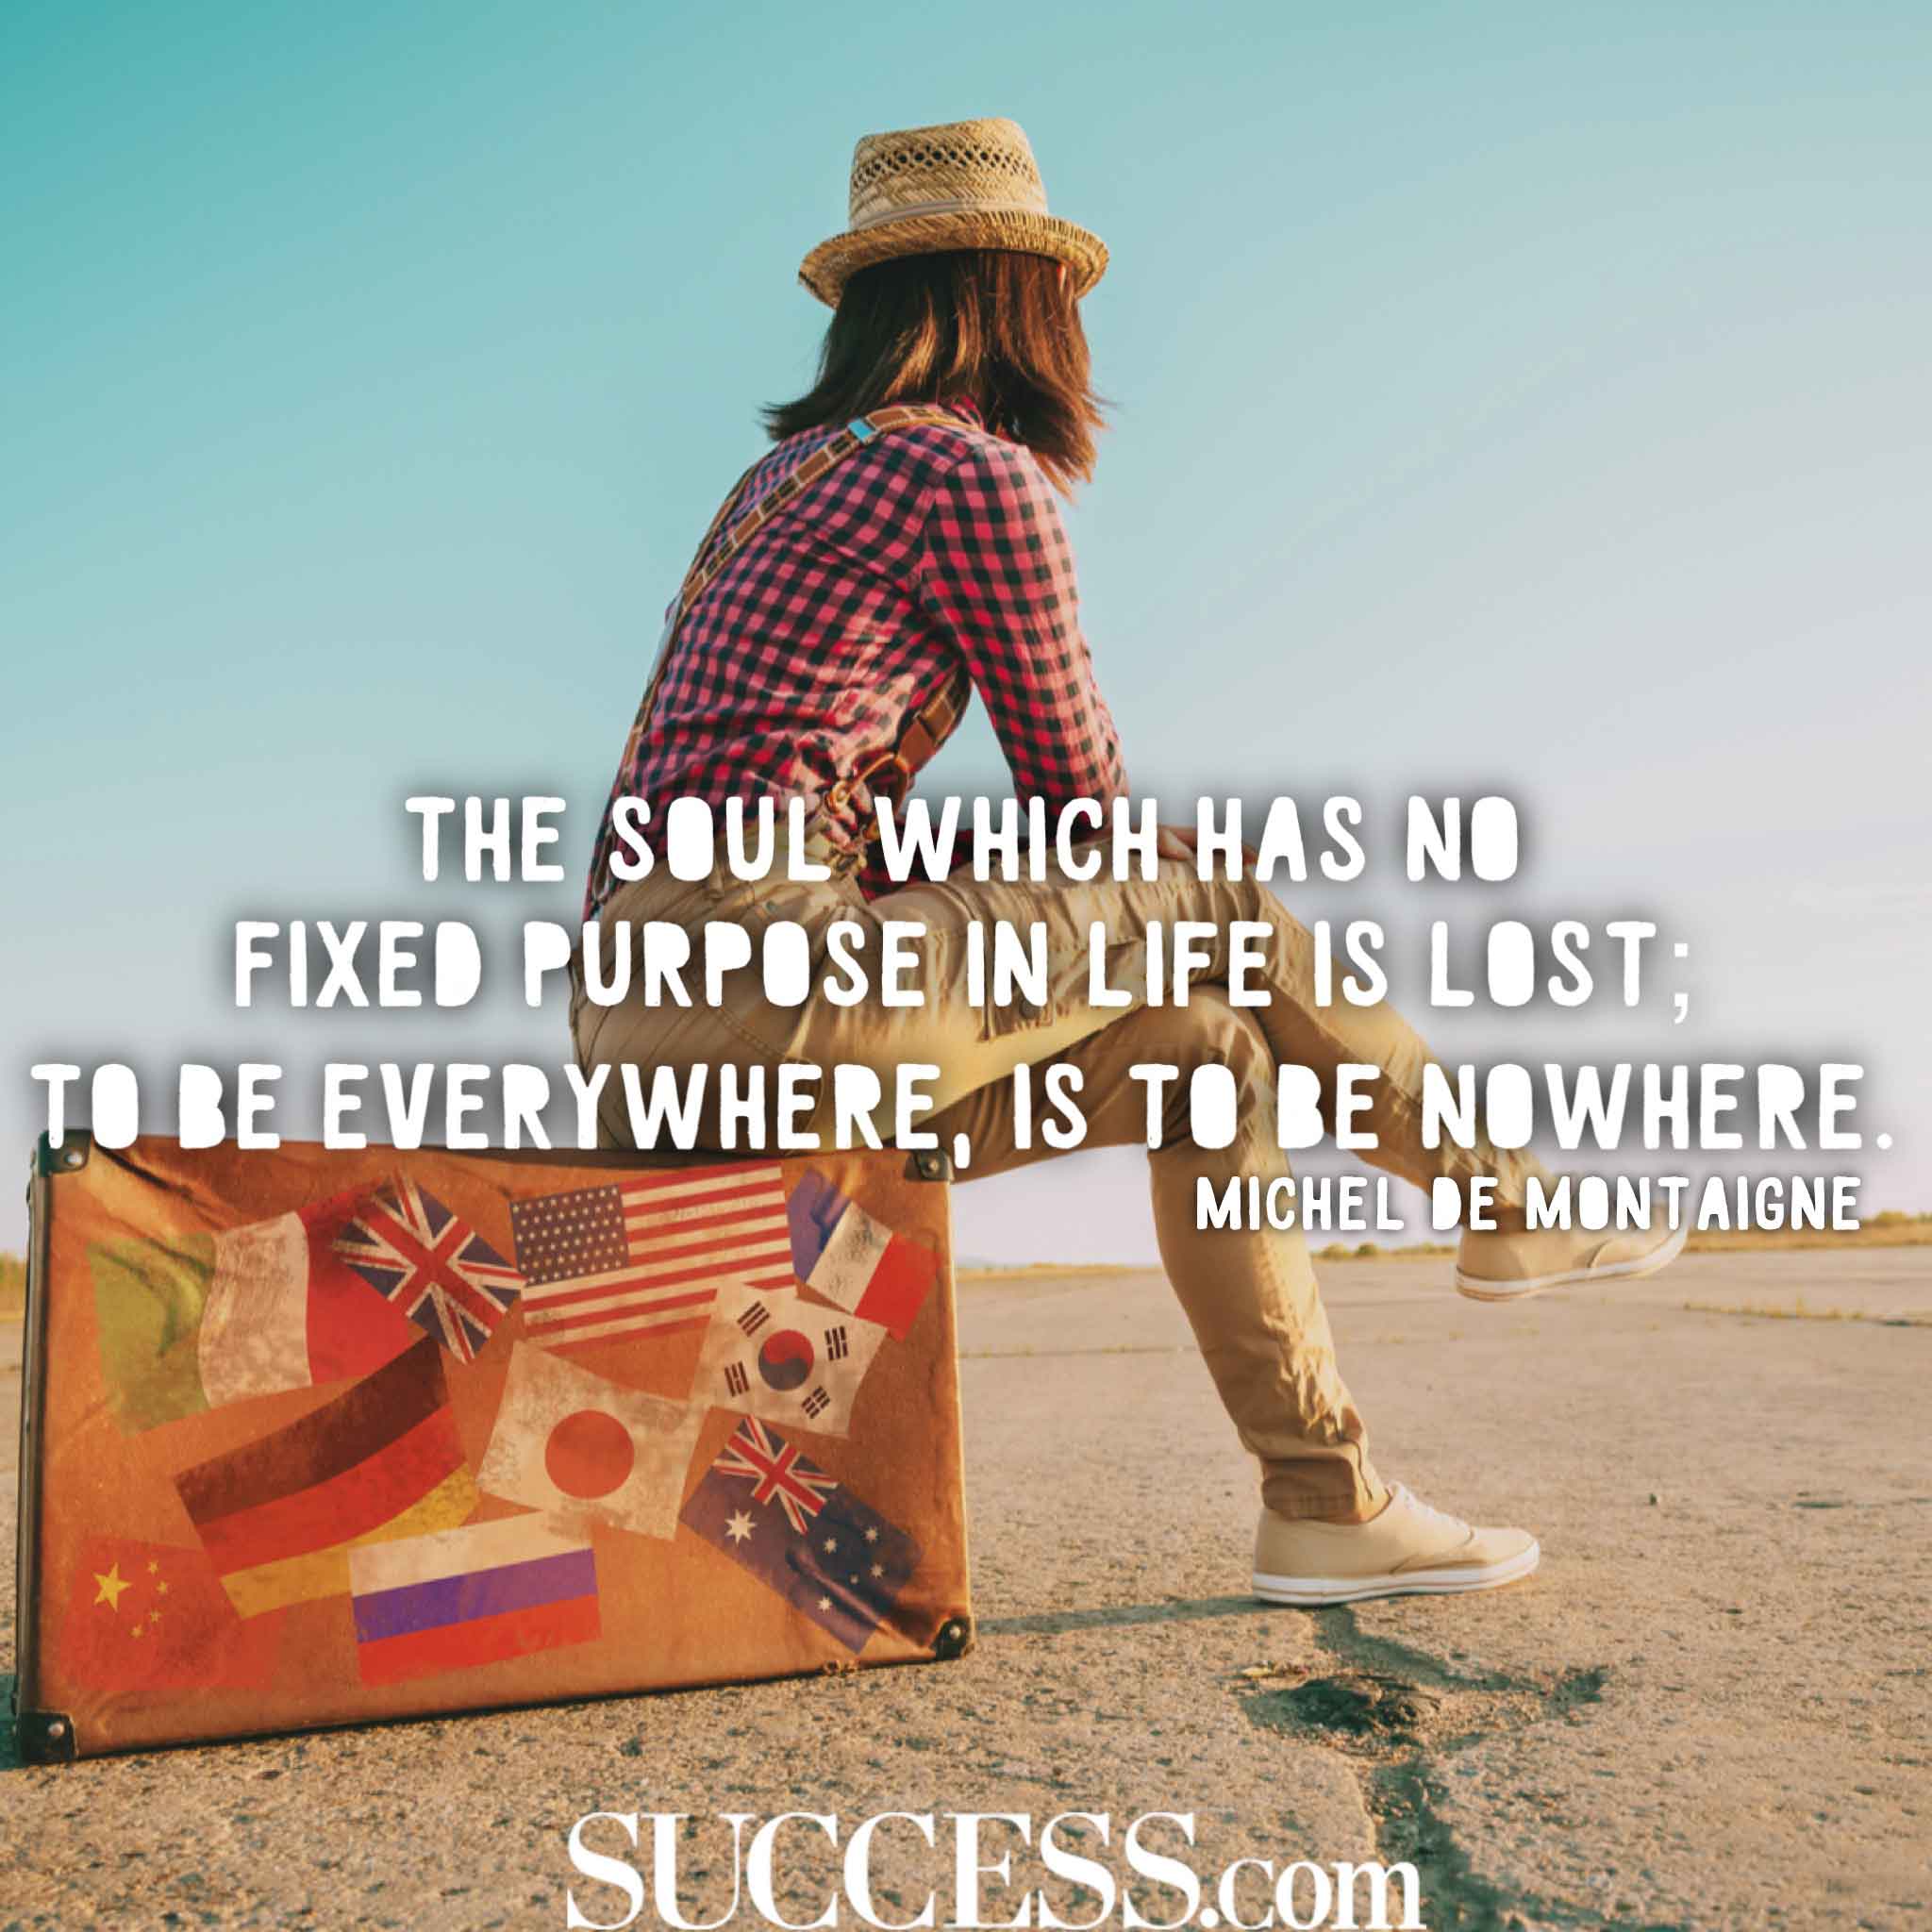 17 Inspiring Quotes to Help You Live a Life of Purpose